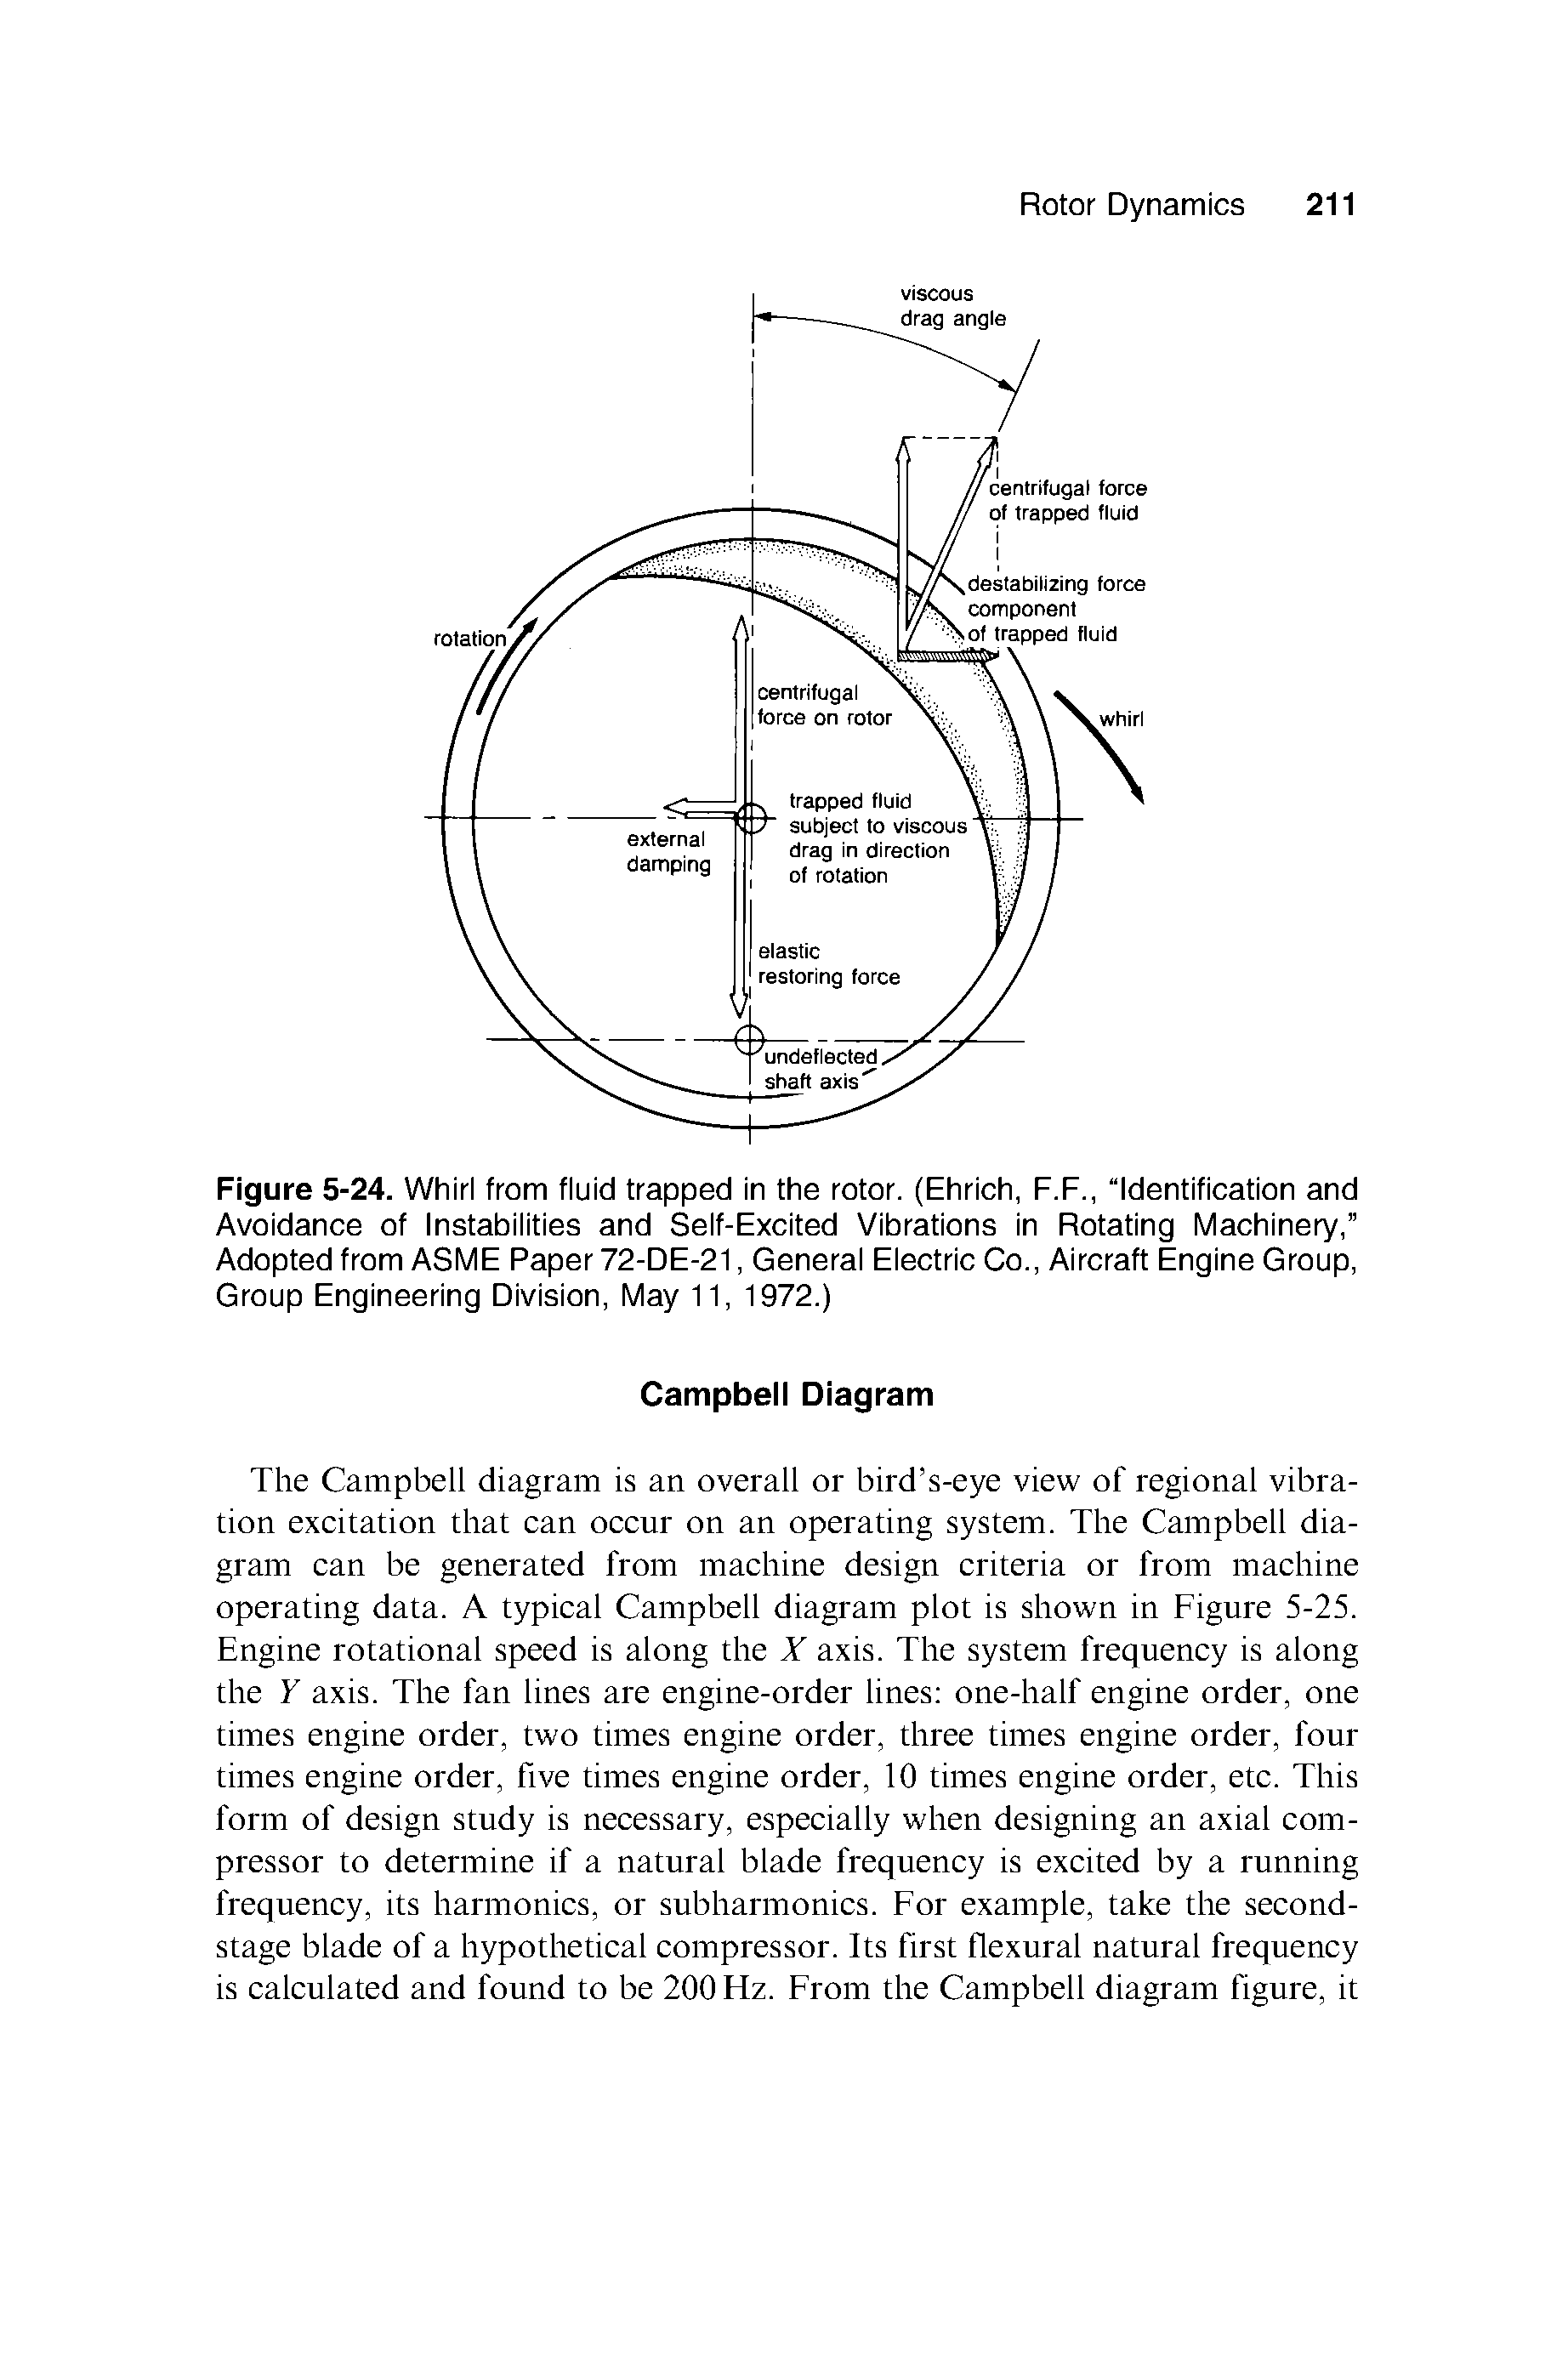 Figure 5-24. Whirl from fluid trapped in the rotor. (Ehrich, F.F., Identification and Avoidance of Instabilities and Self-Excited Vibrations in Rotating Machinery, Adopted from ASME Paper 72-DE-21, General Electric Co., Aircraft Engine Group, Group Engineering Division, May 11, 1972.)...